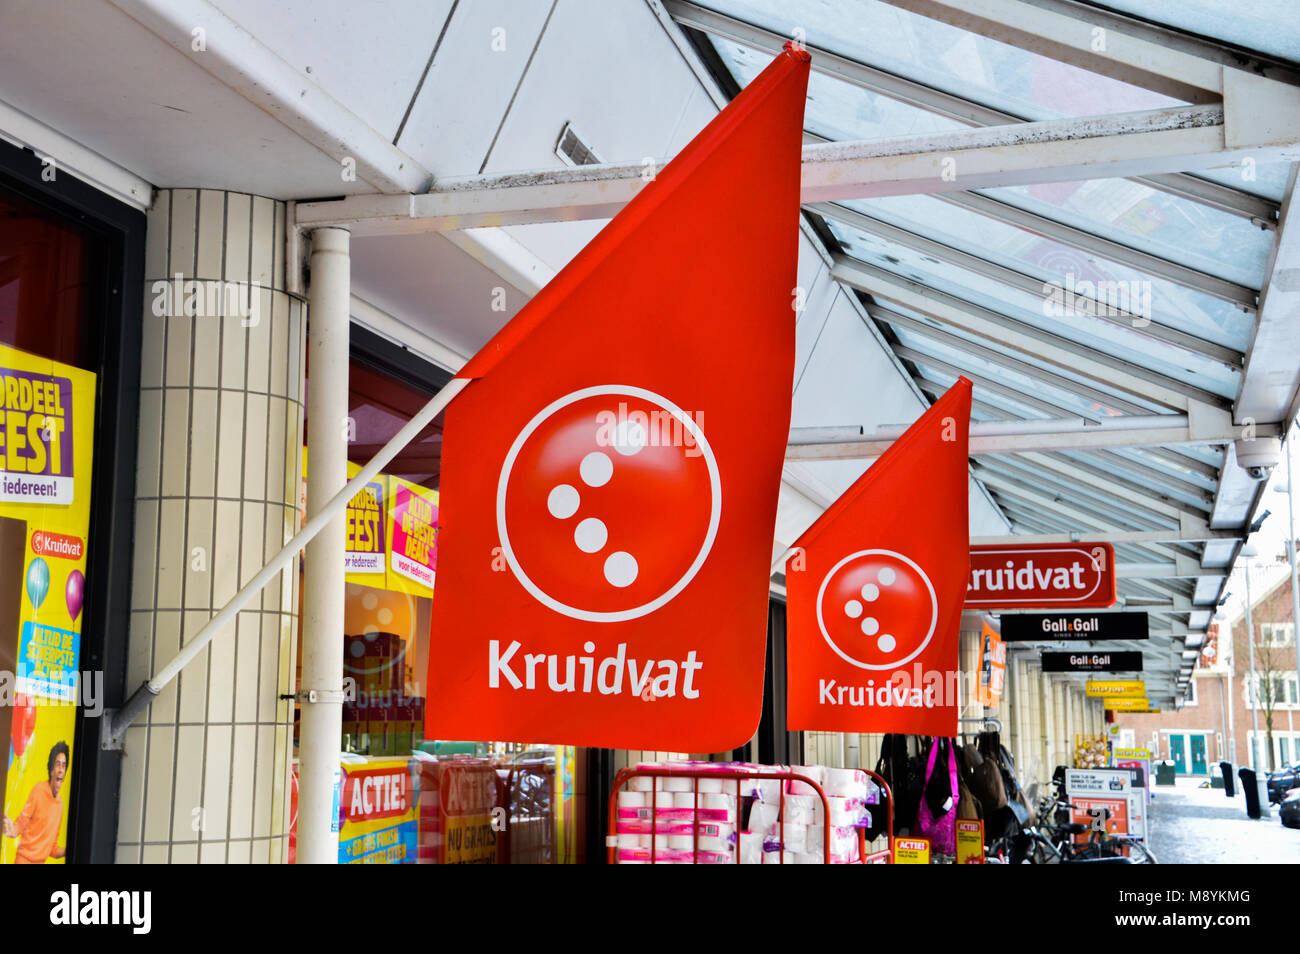 Kruidvat Shop High Resolution Stock Photography and Images Alamy